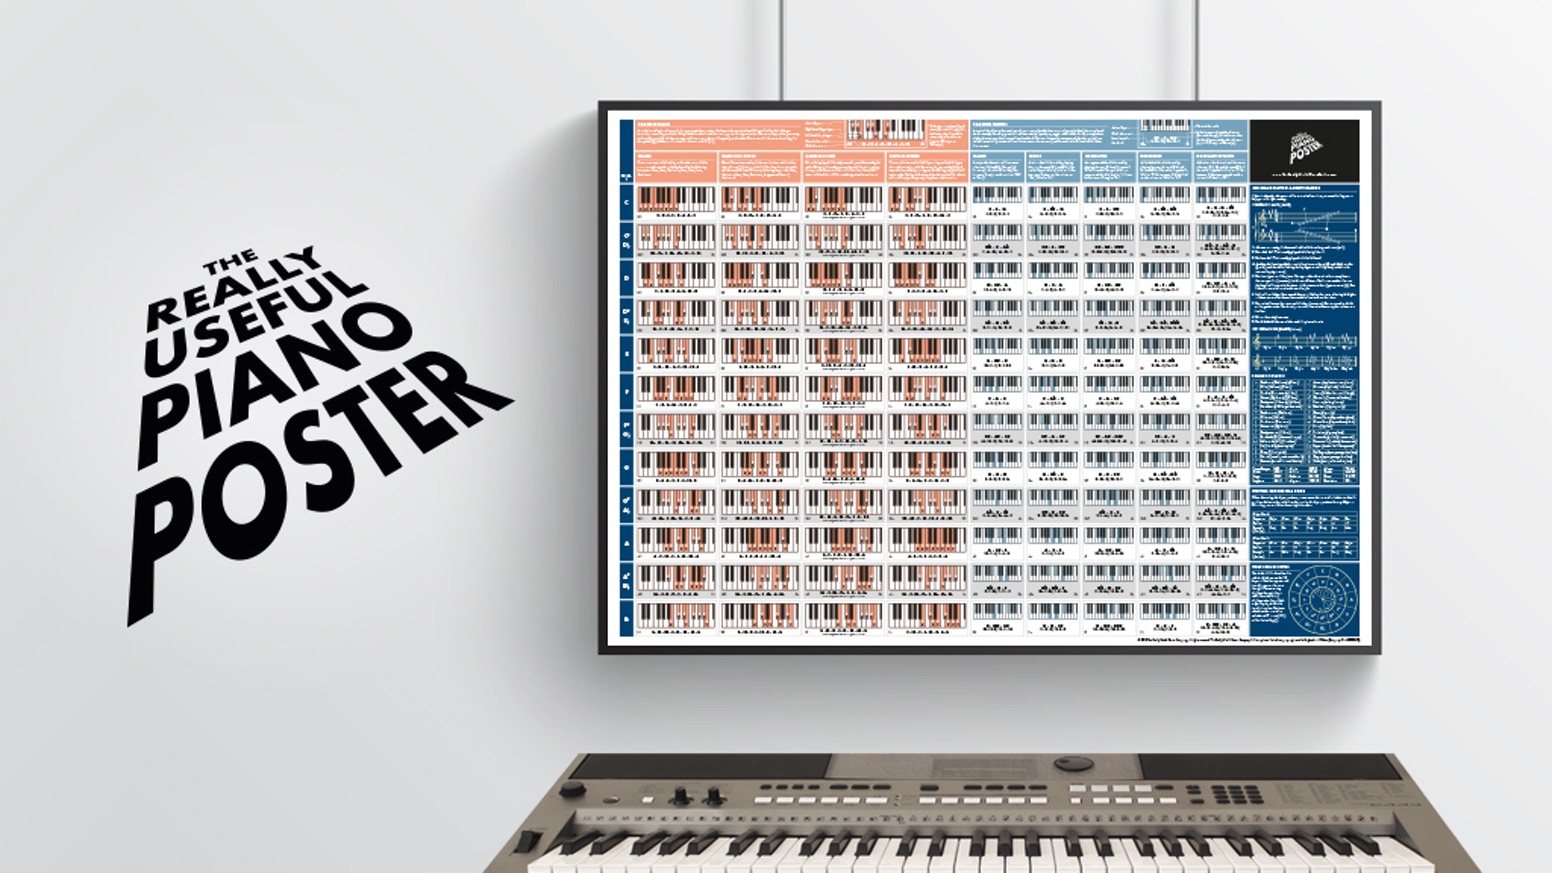 The Really Useful Chord Progression Poster is really useful